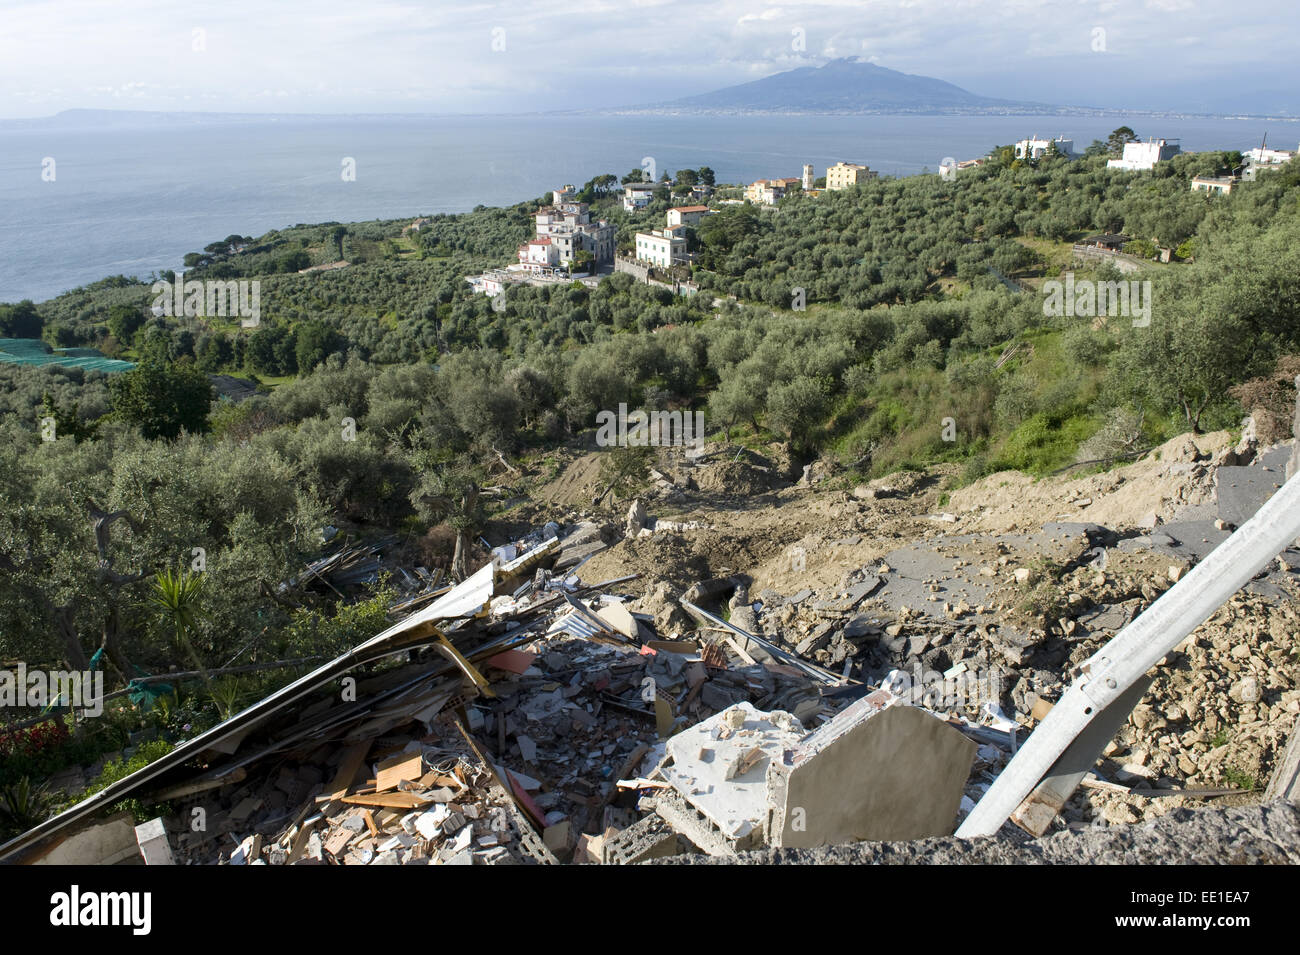 Flood damaged coastal road through olive groves and farmland, which has collapsed after heavy rain on the Bay of Naples near Sorrento, May Stock Photo